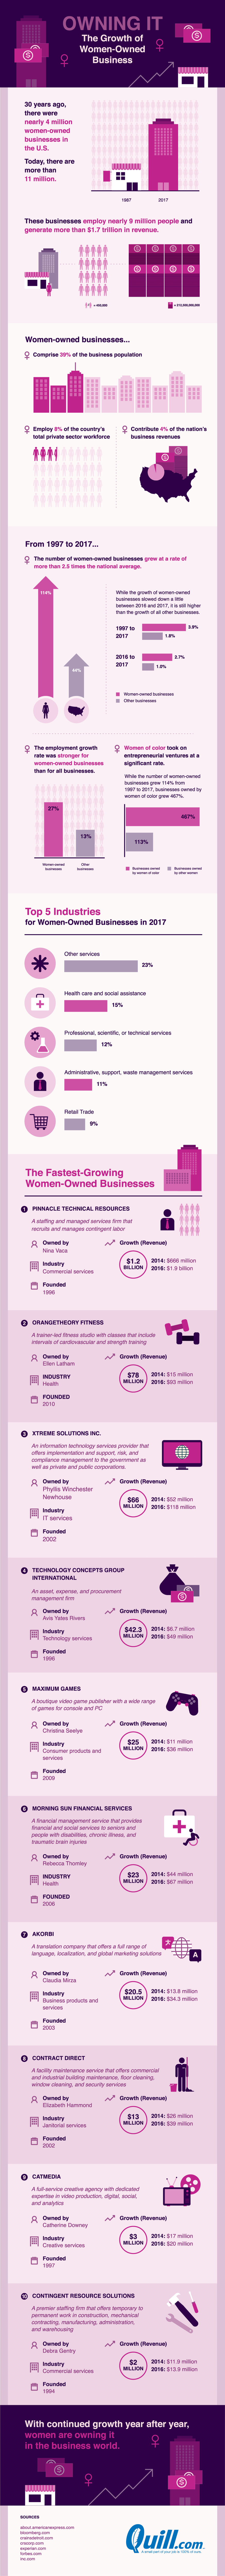 growth-women-owned-businesses1  